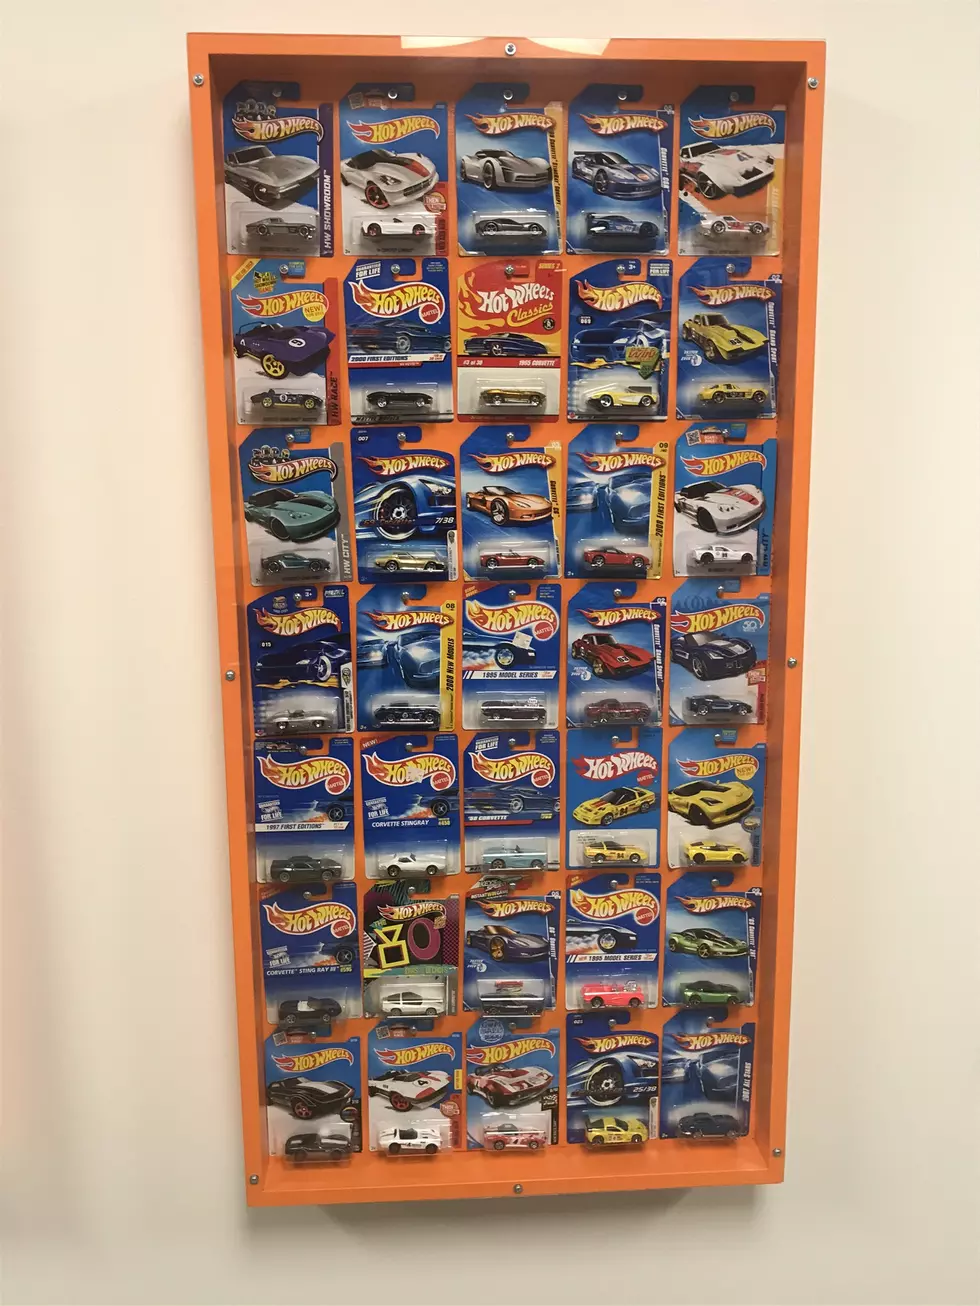 A Hot Wheels collection has become a Hot Wheels museum